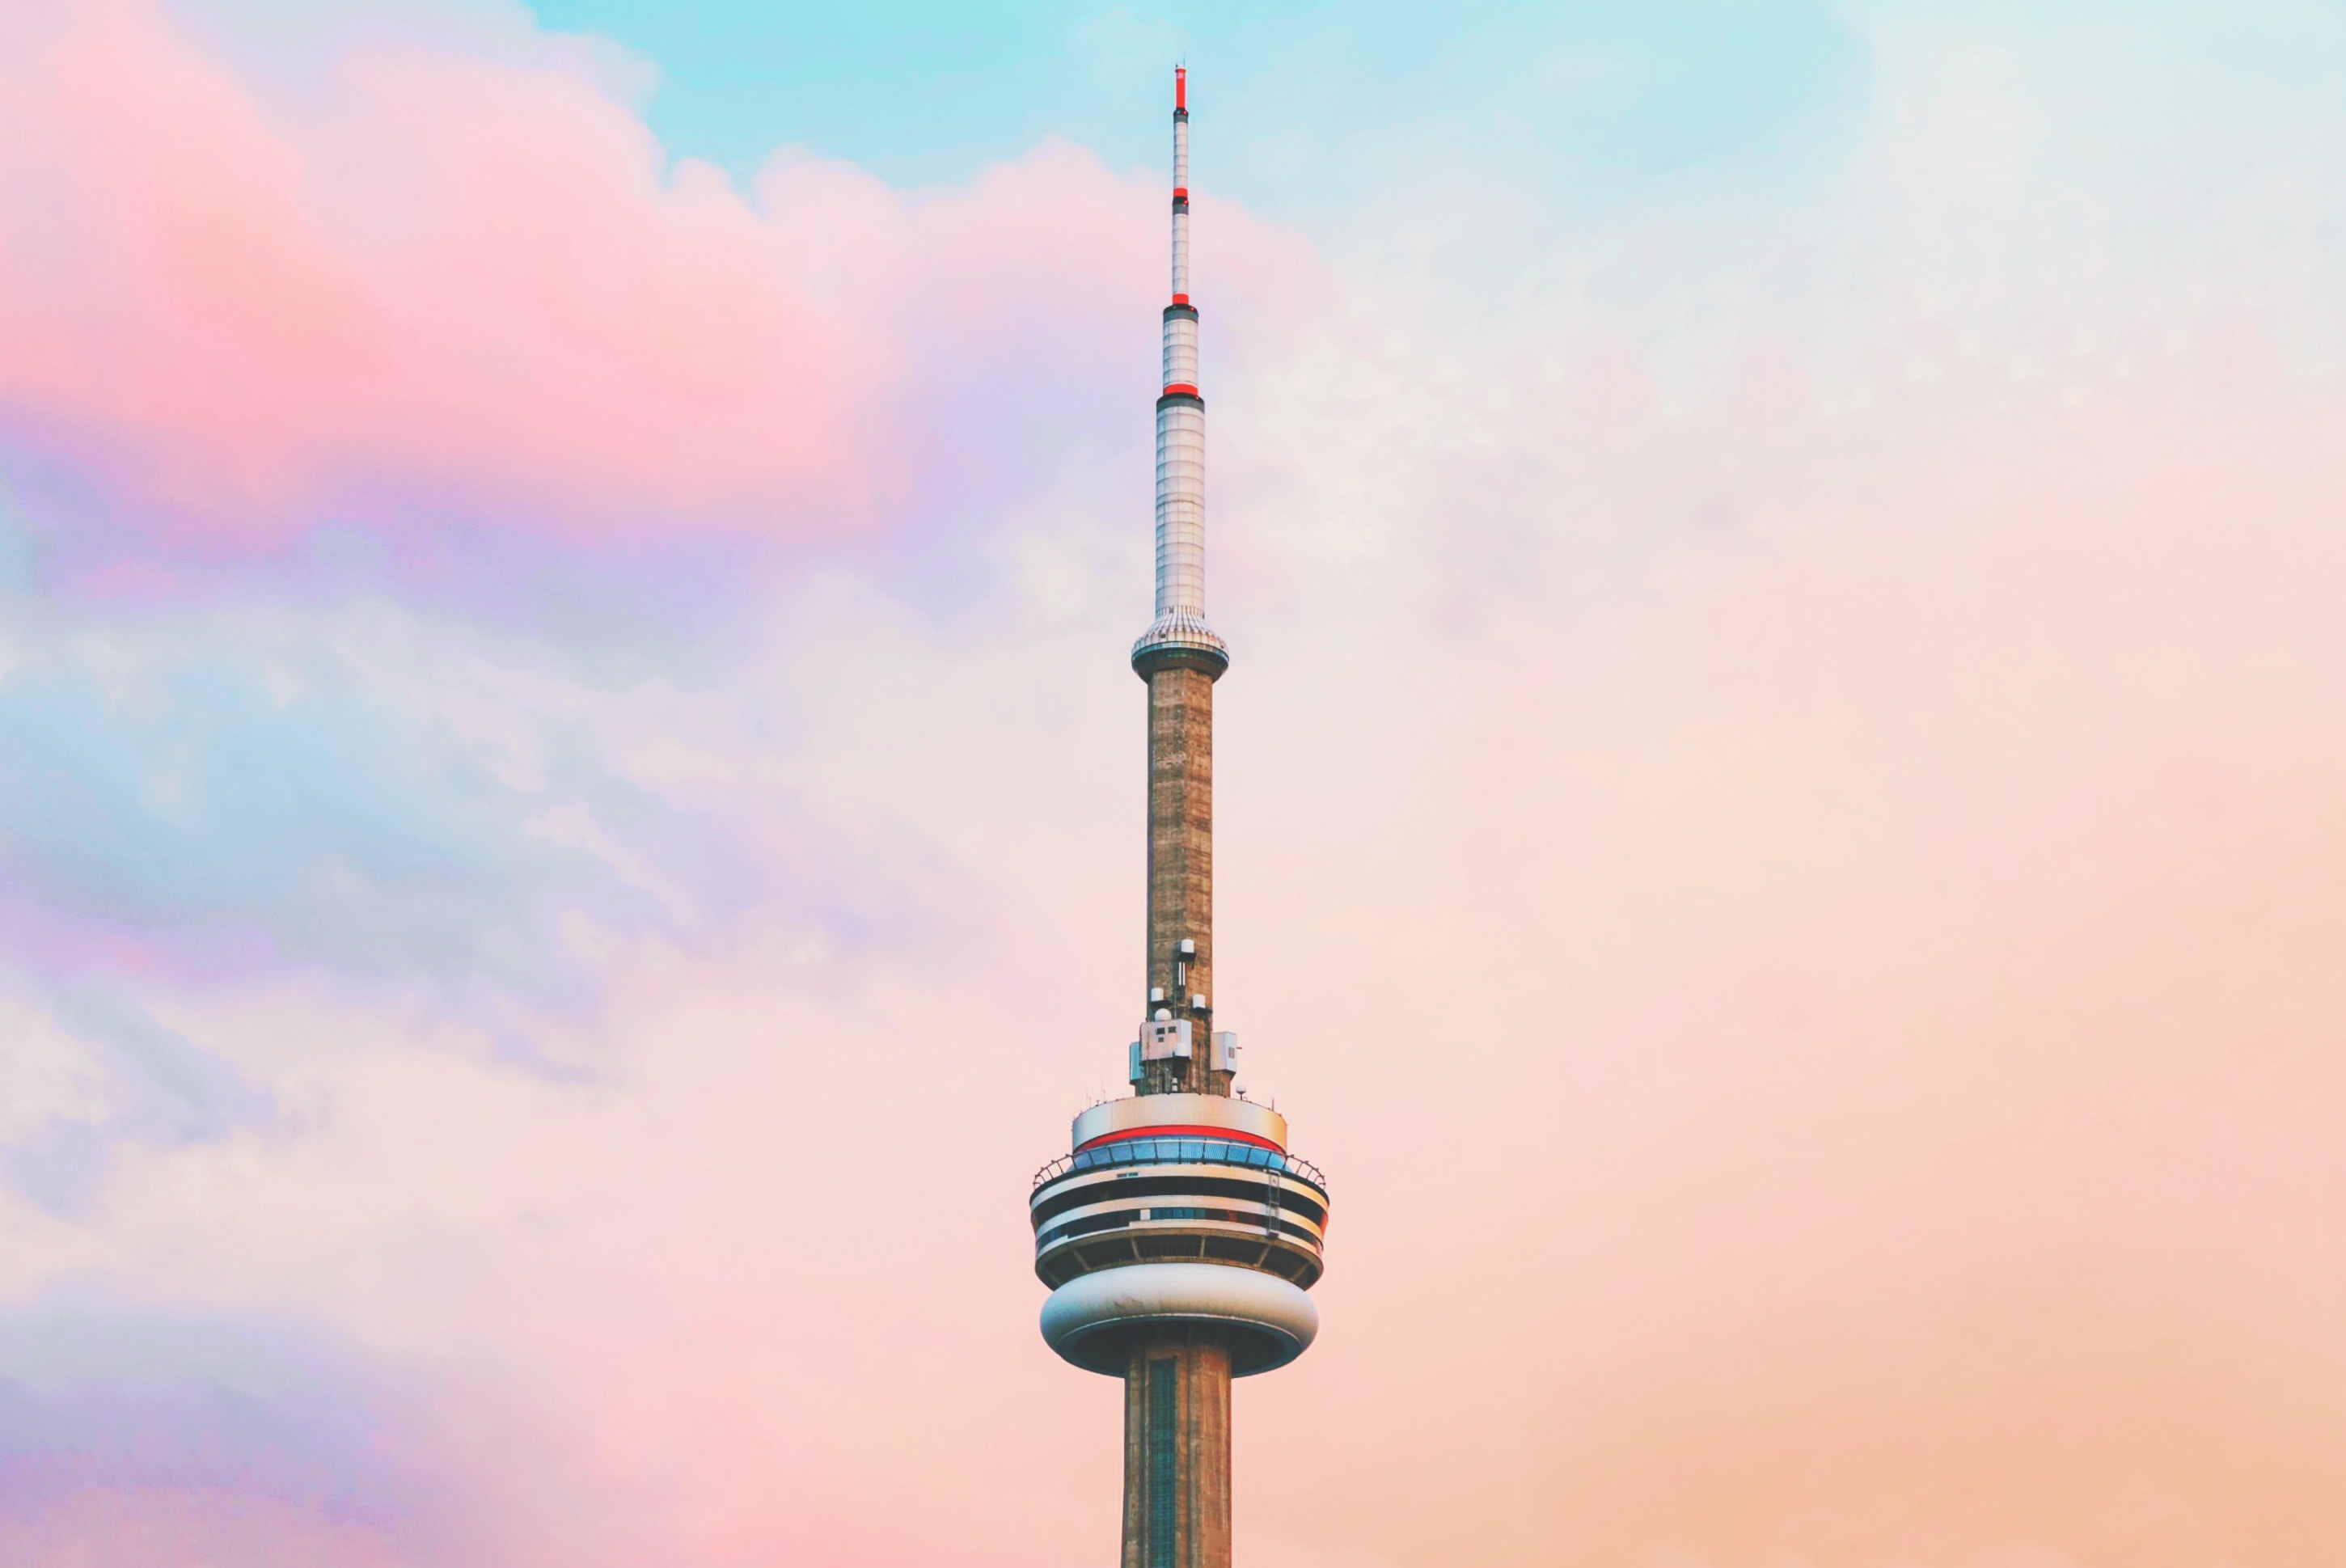 The top of the iconic CN Tower, surrounded by a blue sky and pink clouds.